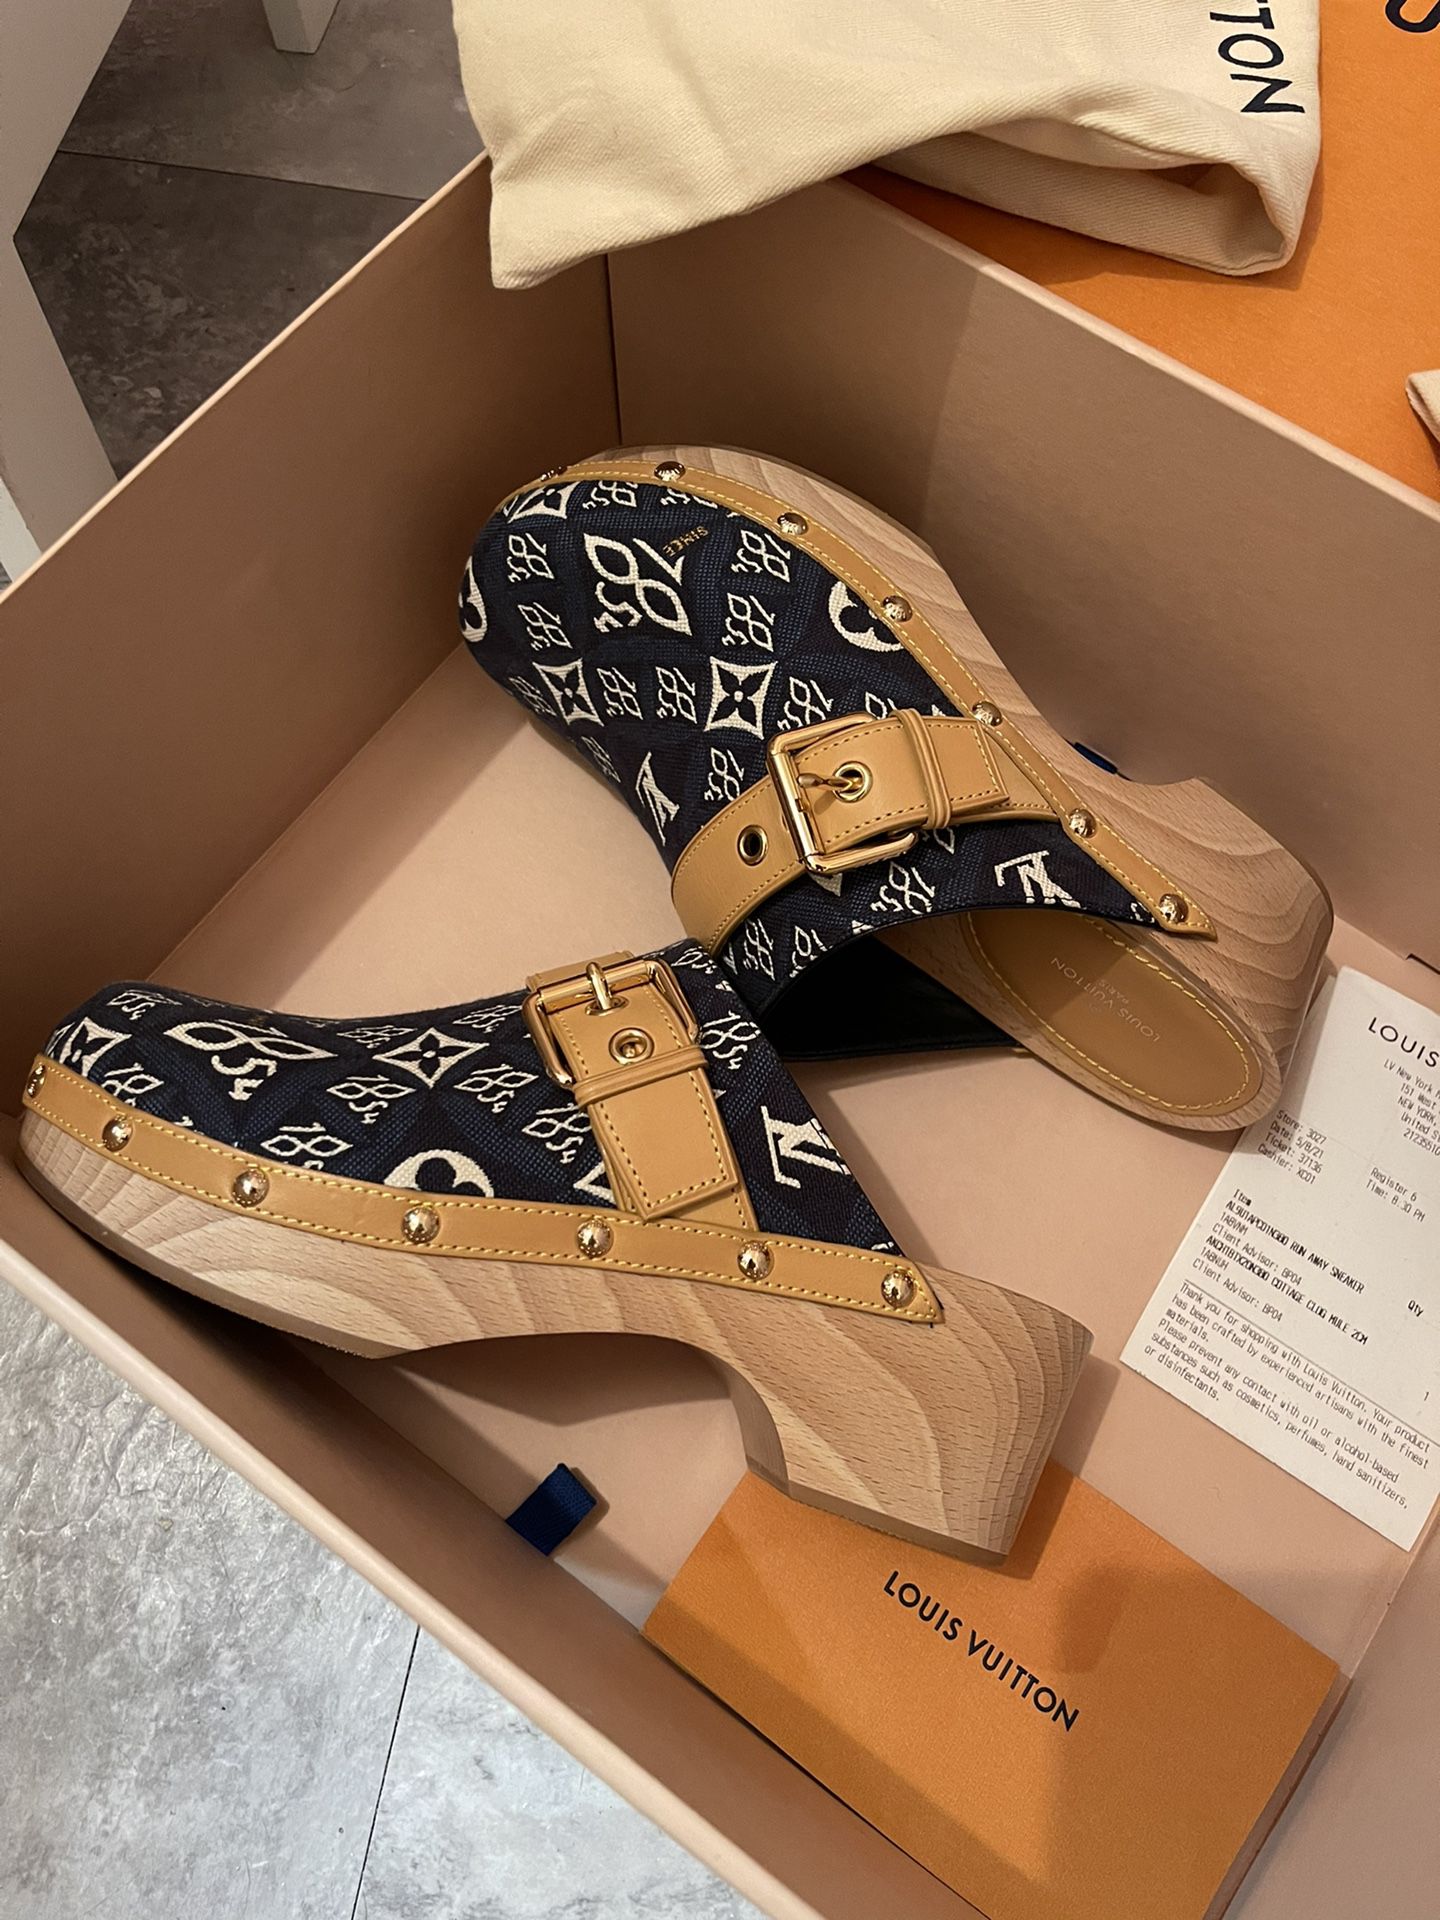 Louis Vuitton Women Shoes Size 7.5 for Sale in Queens, NY - OfferUp